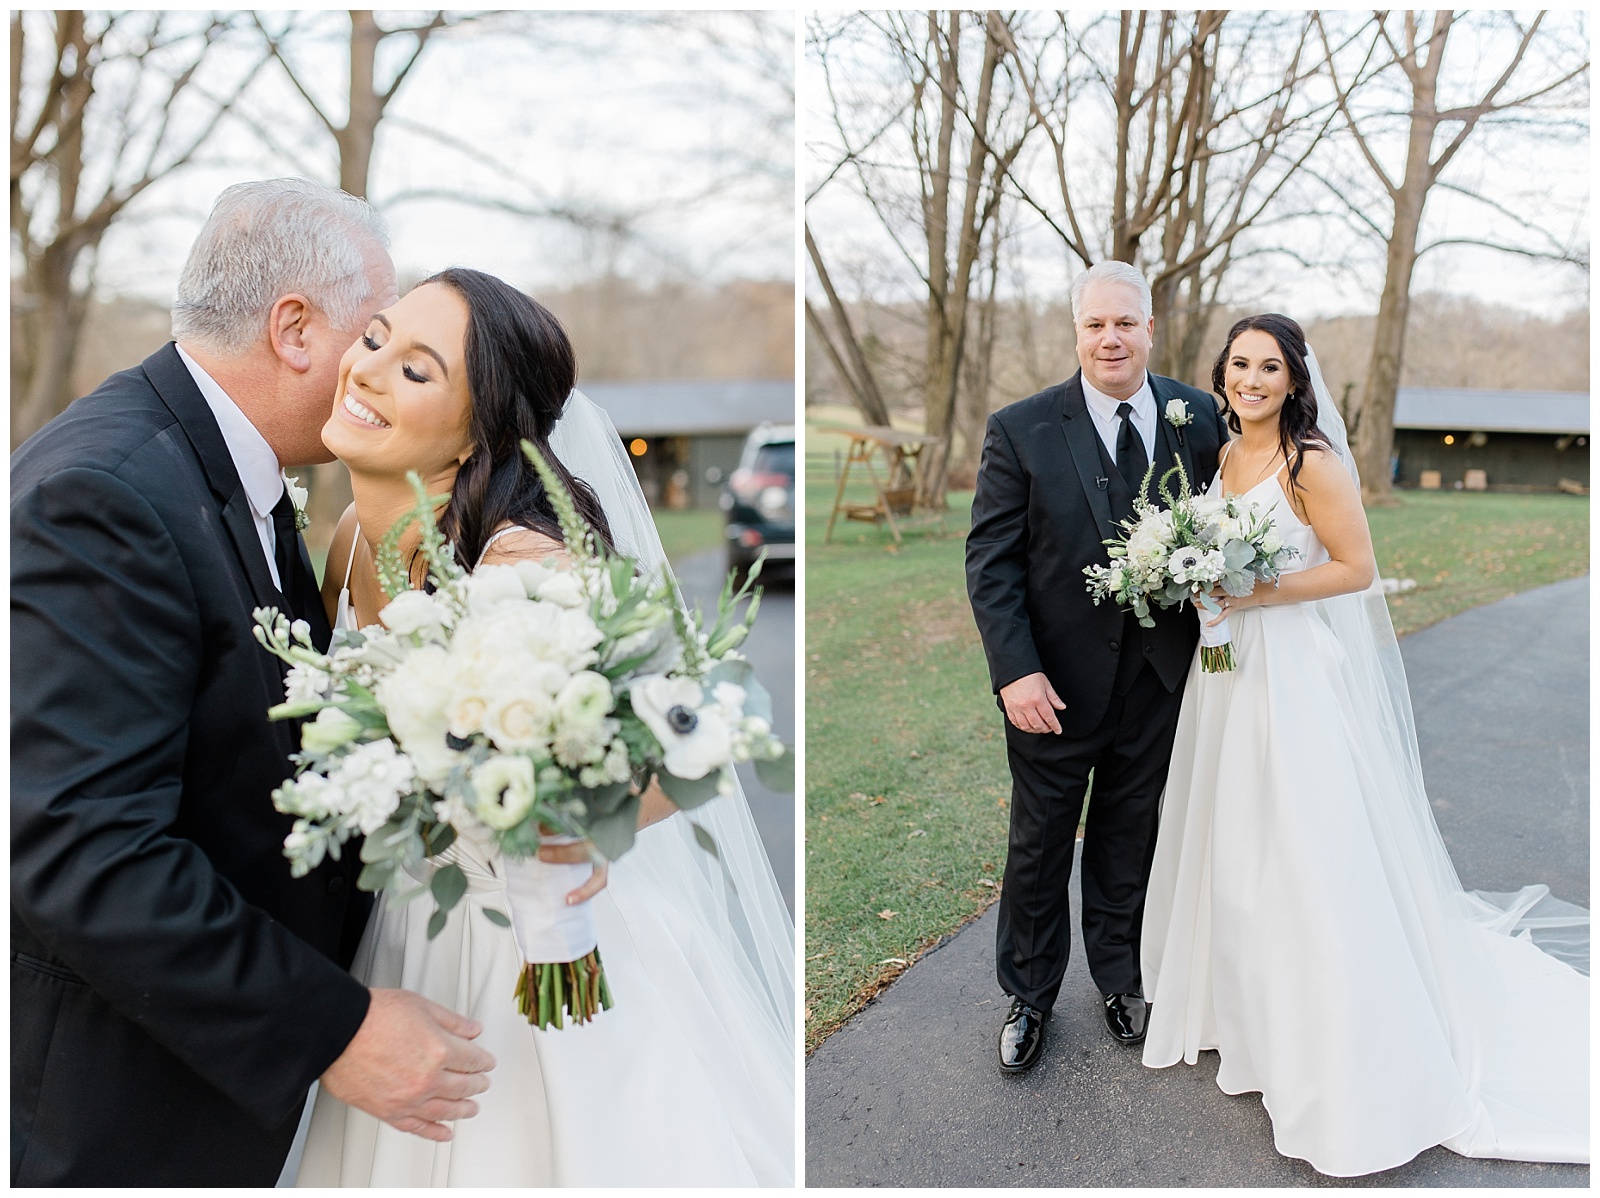 father of the bride kisses his daughter on her cheek and poses for a portrait